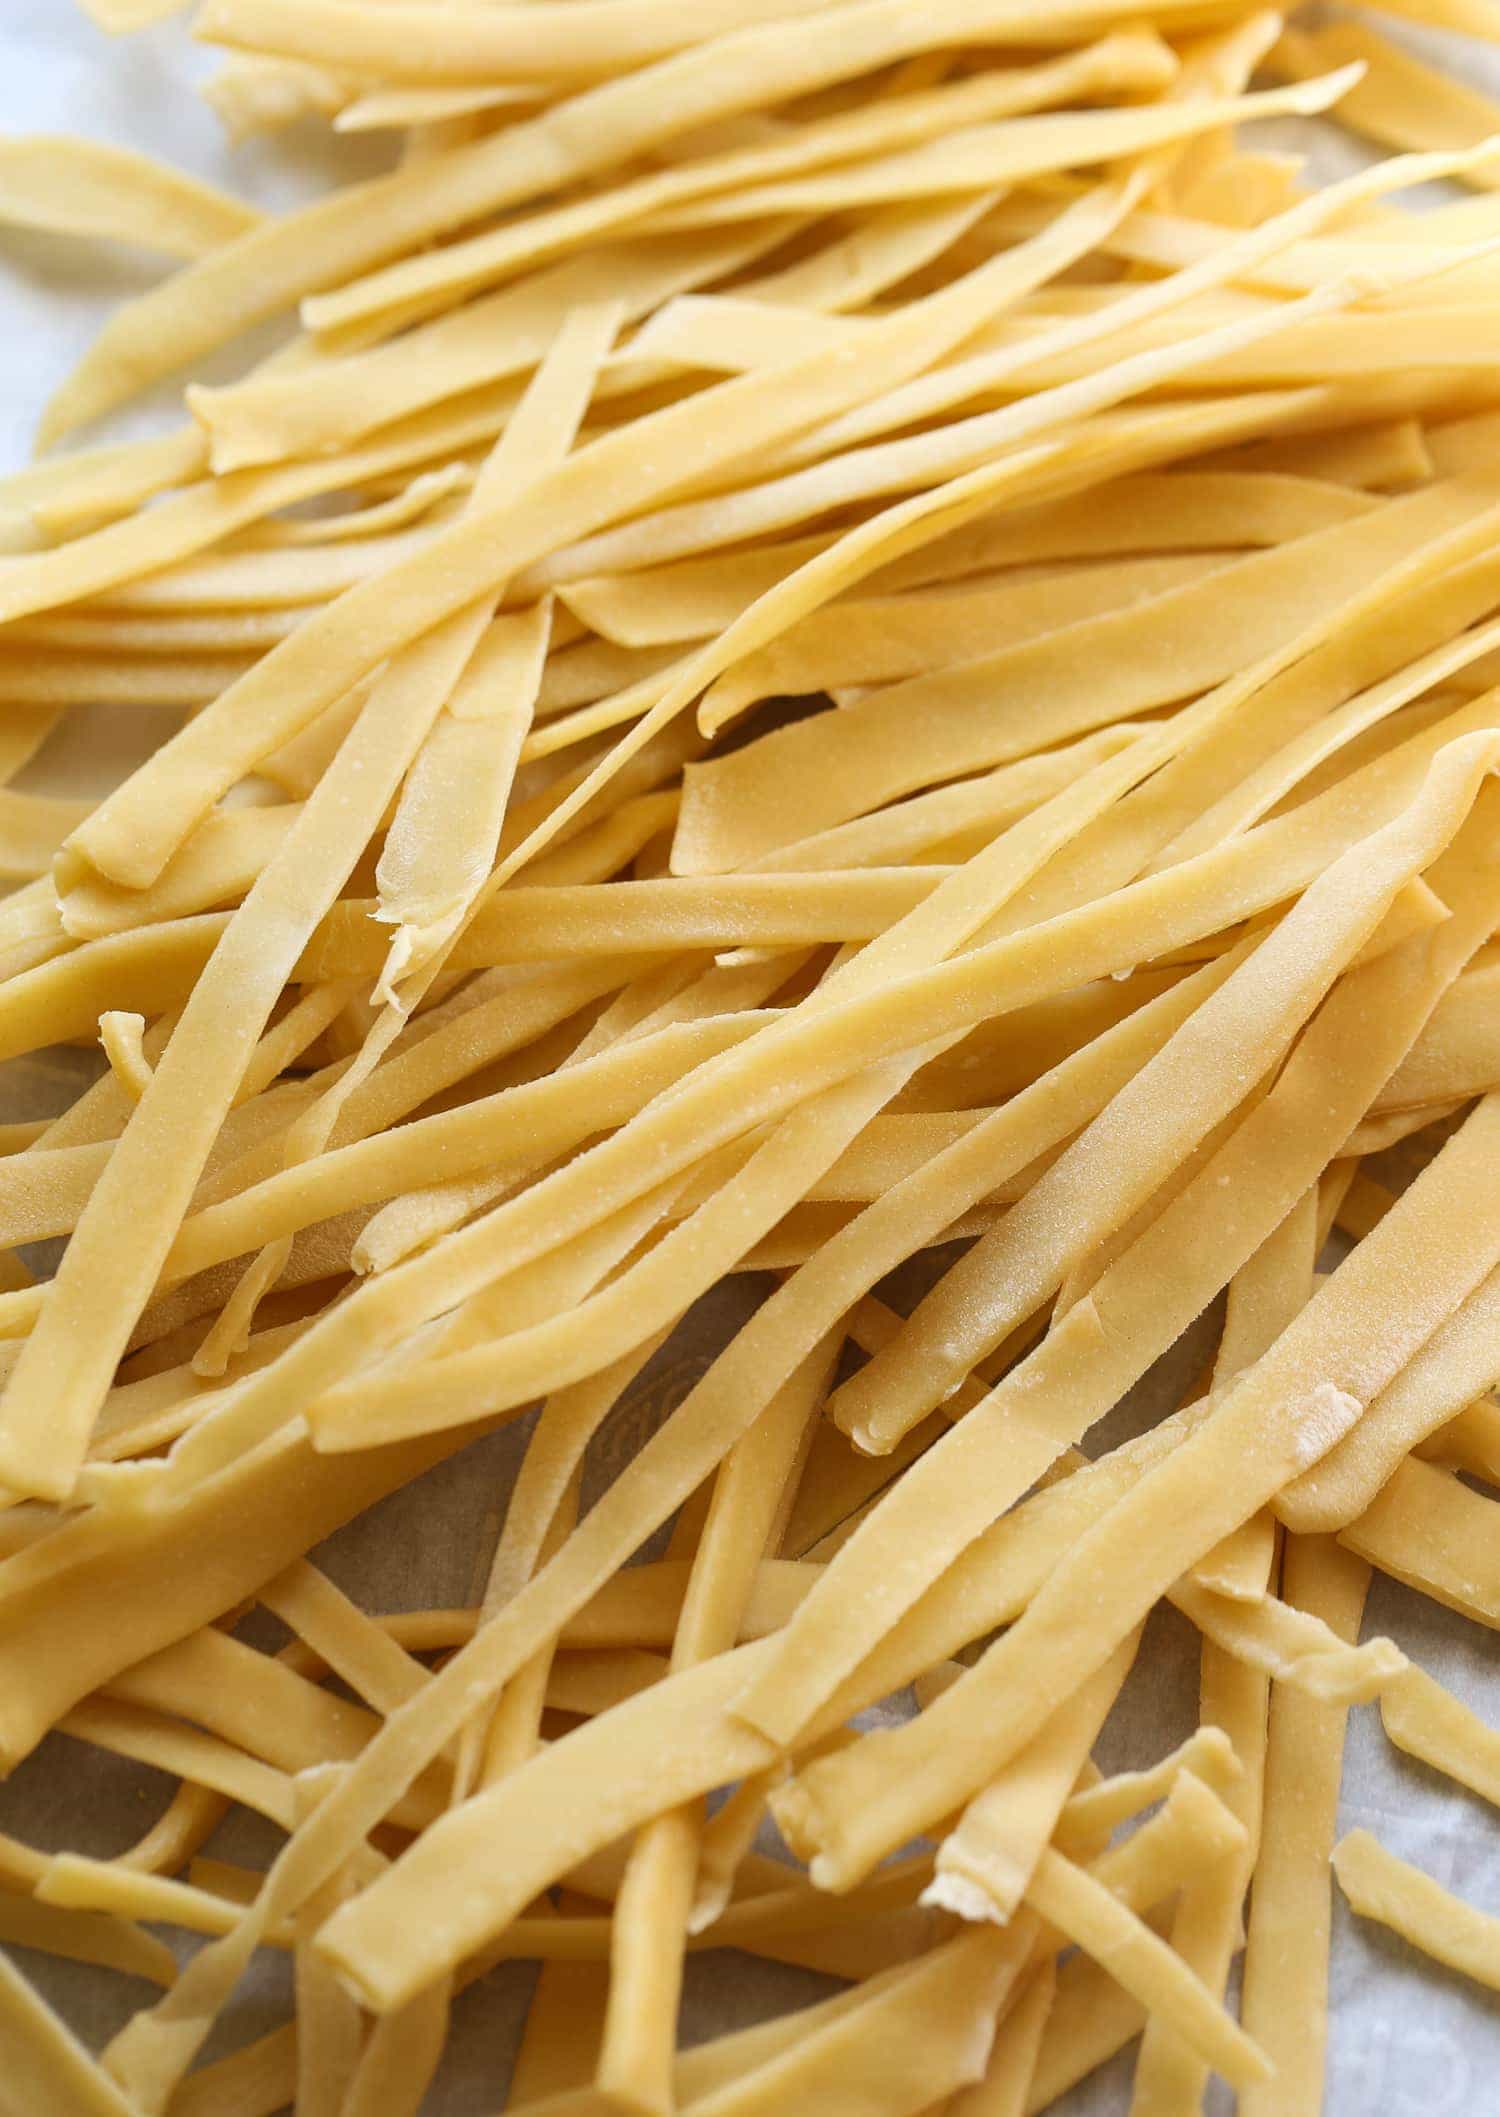 A pile of dried egg noodles